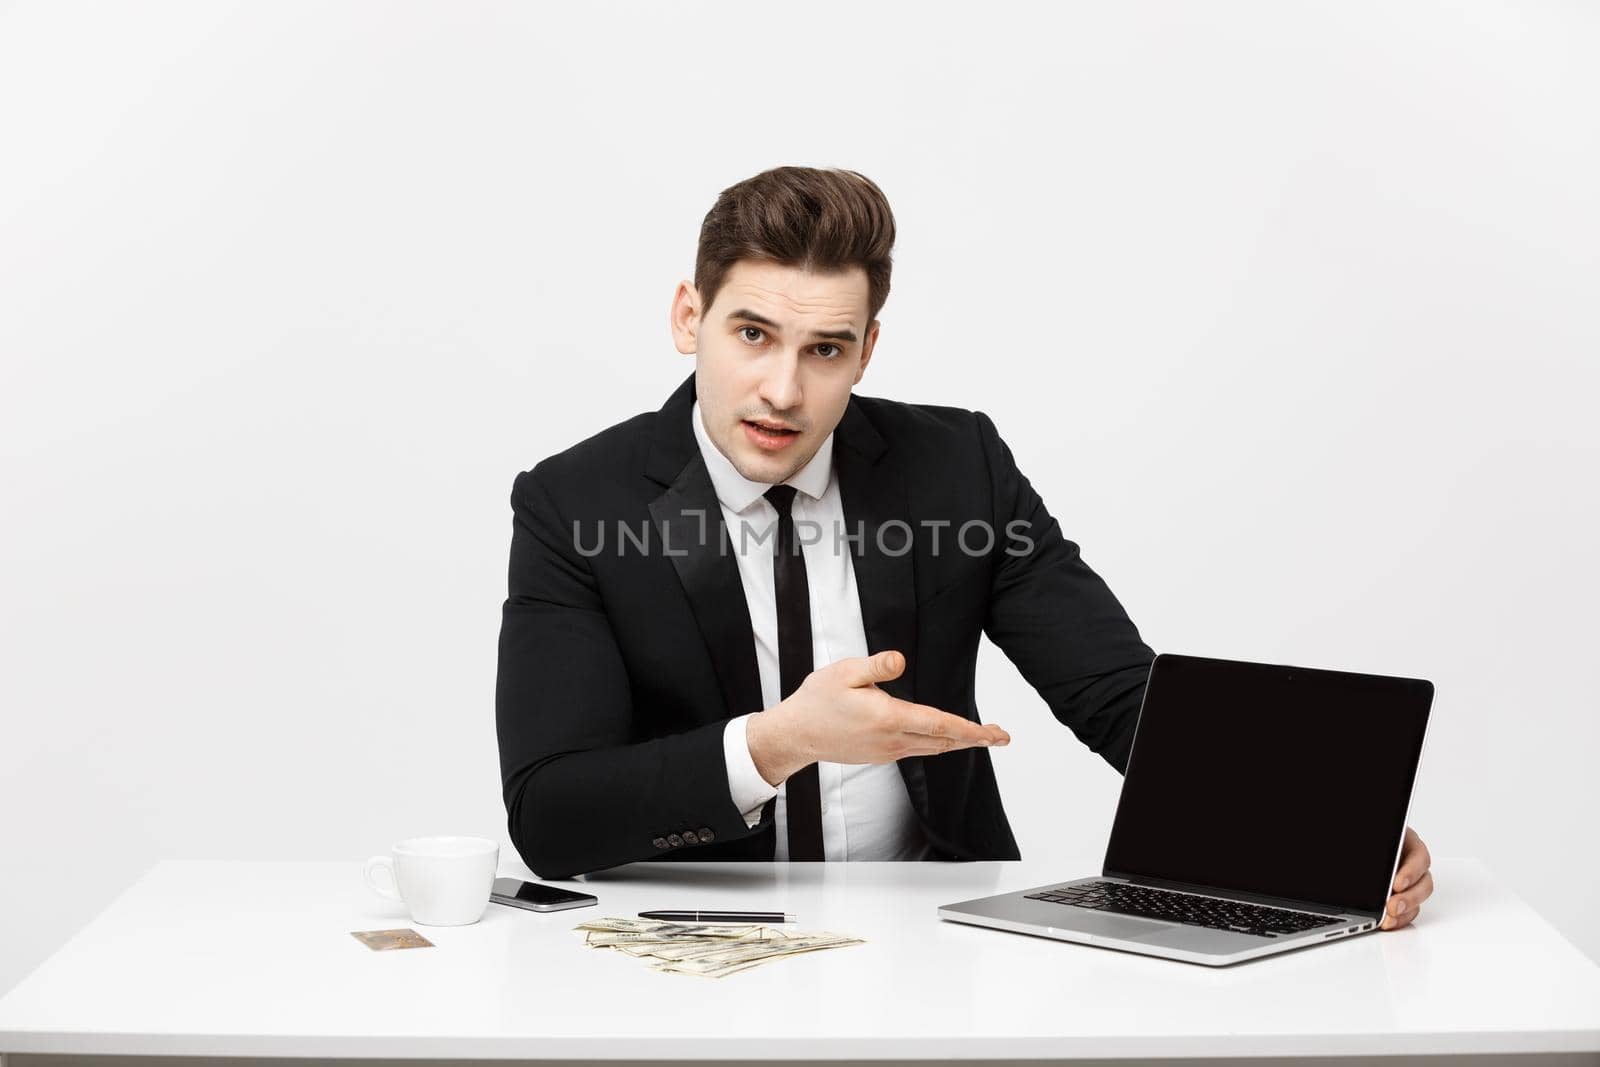 Smiling businessman presenting his laptop computer to the viewer with a blank screen with copy space.